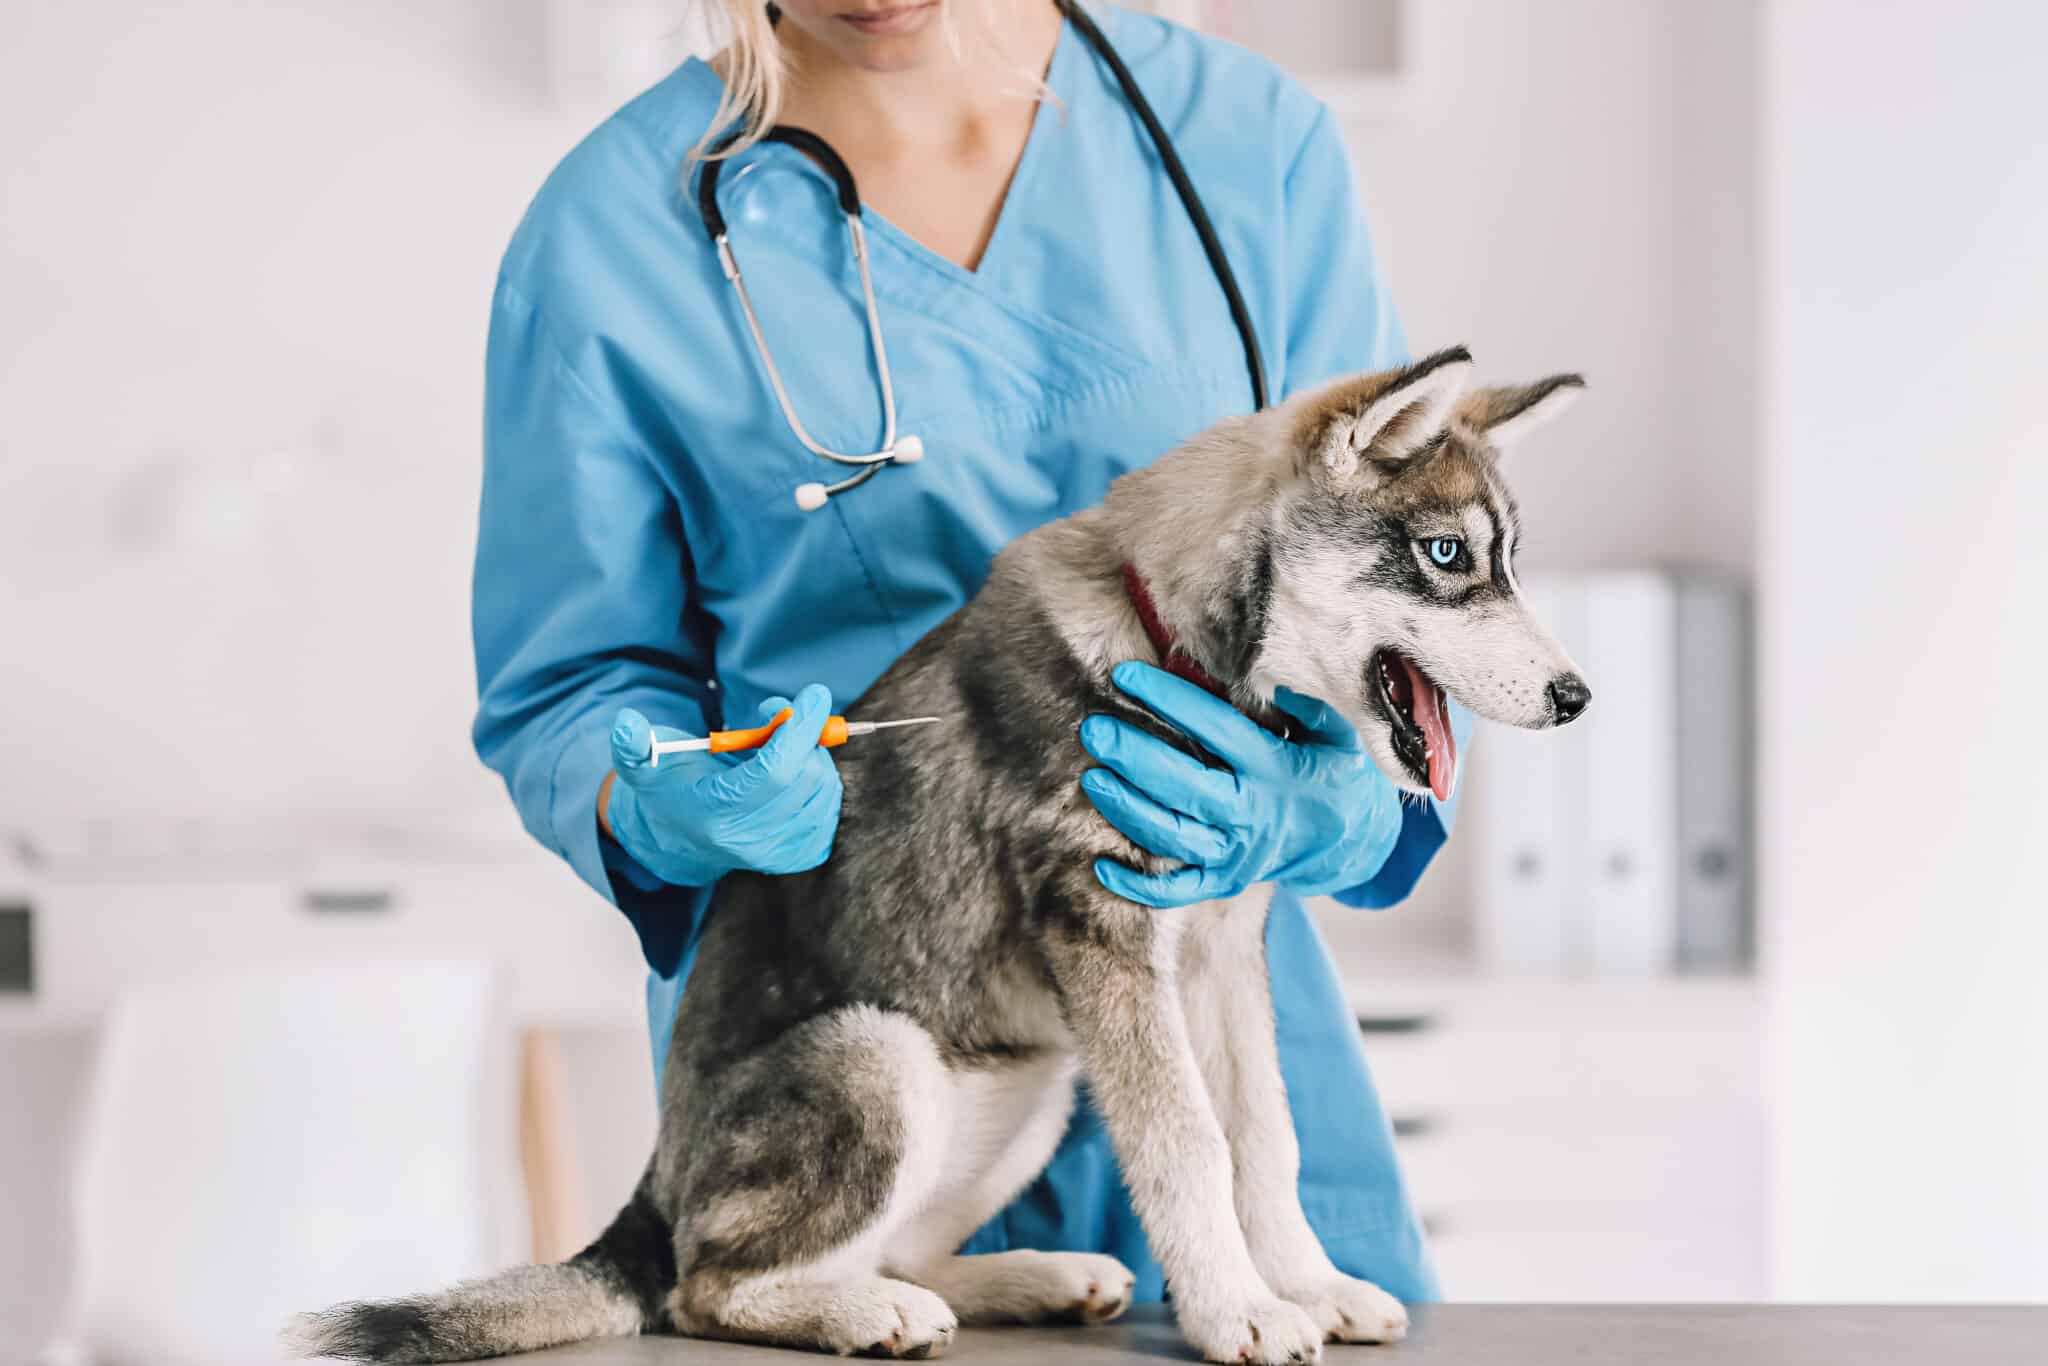 How Much Is The Heartworm Shot For Dogs?